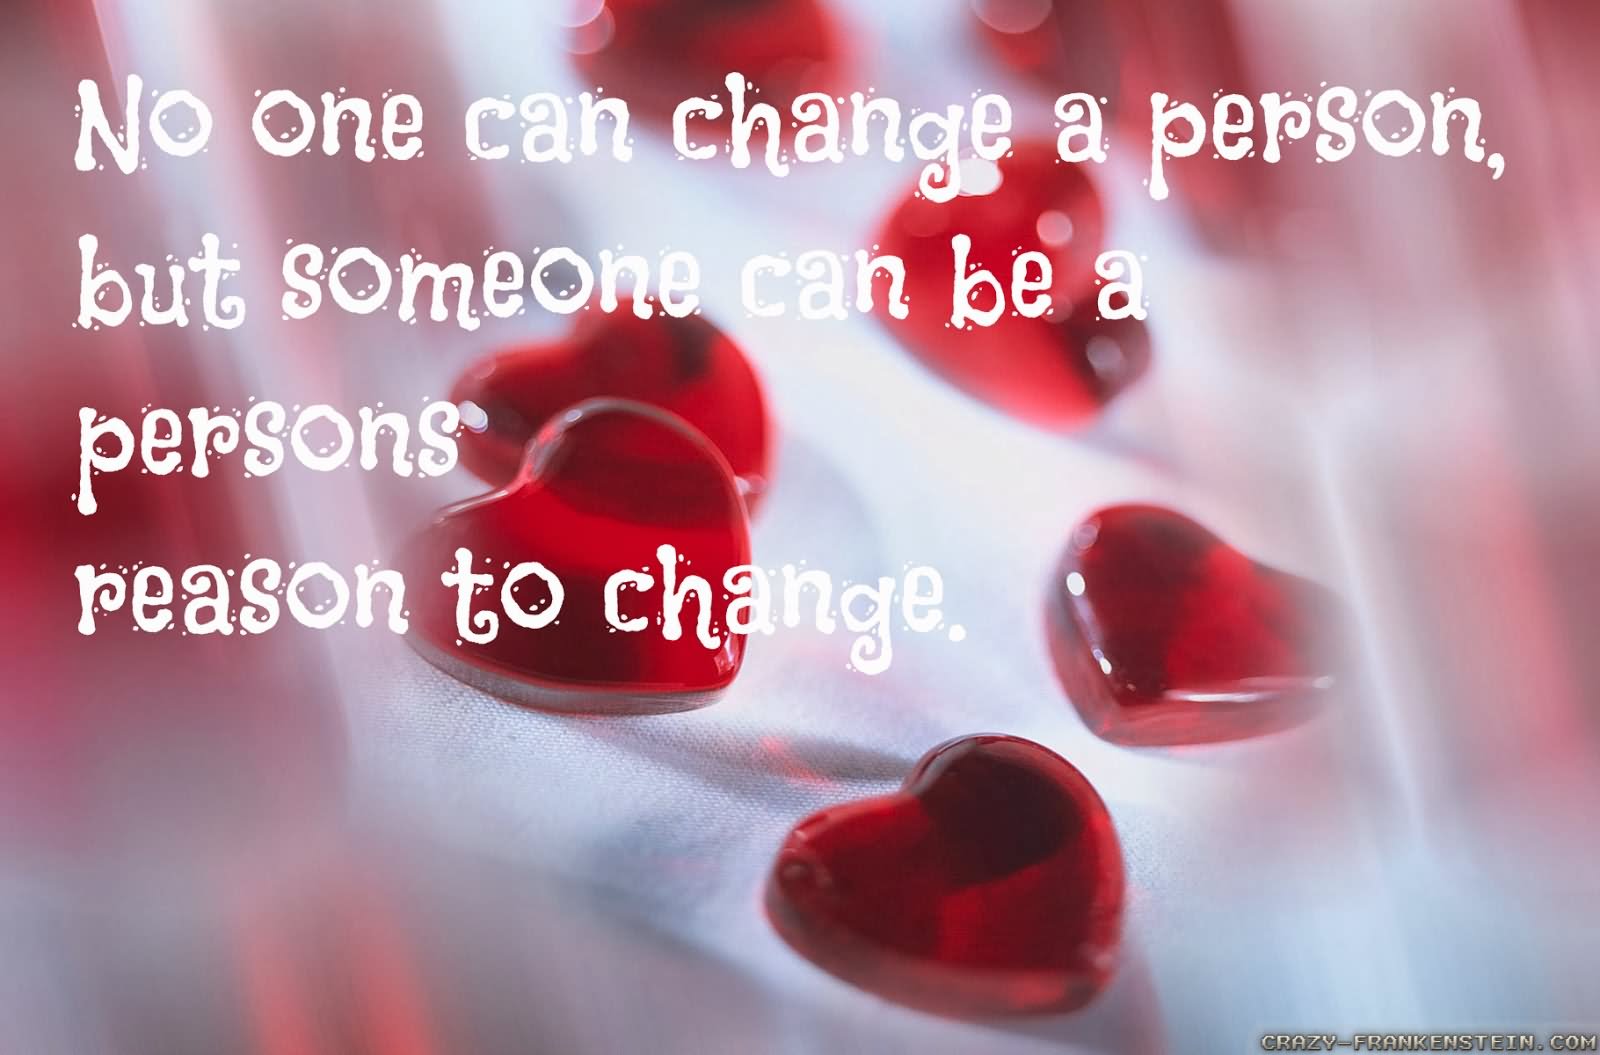 one can change a person but someone can be a persons reasons to change.